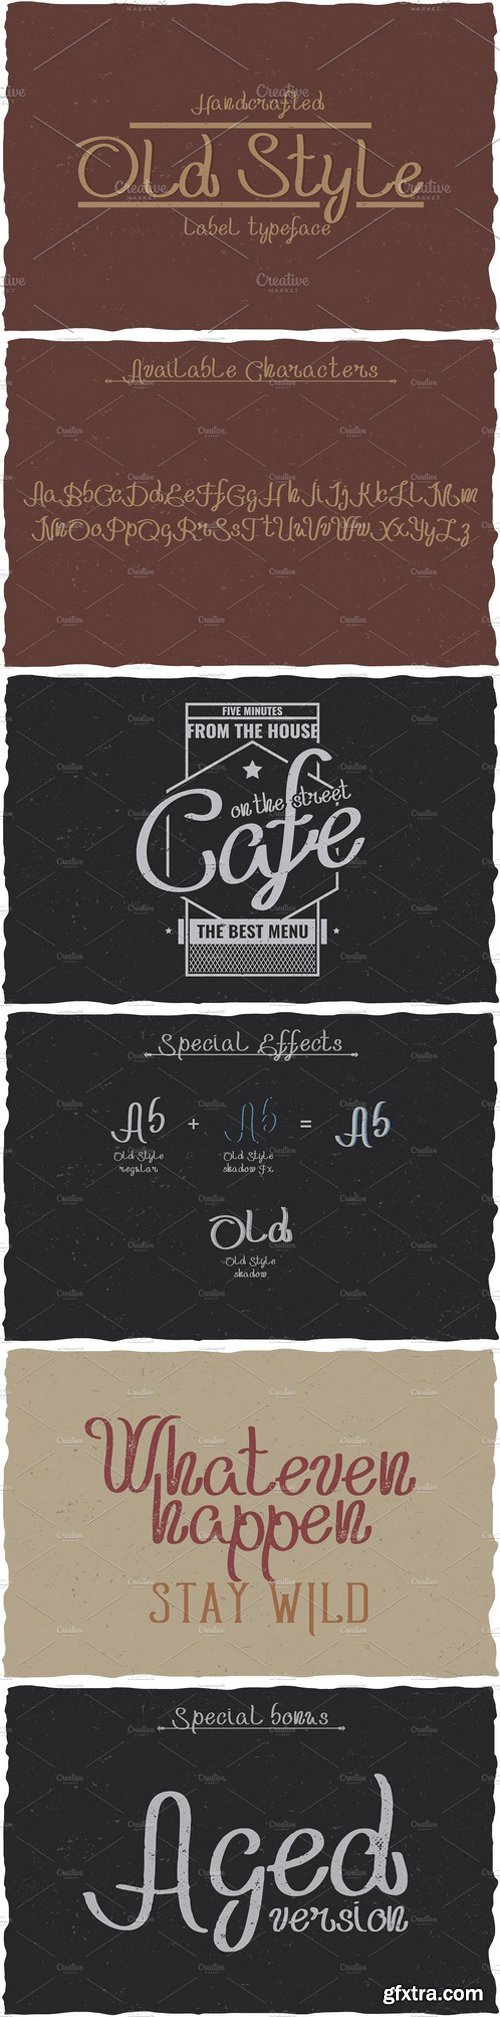 CM - Handcrafted Old Style Label Typeface 1638320